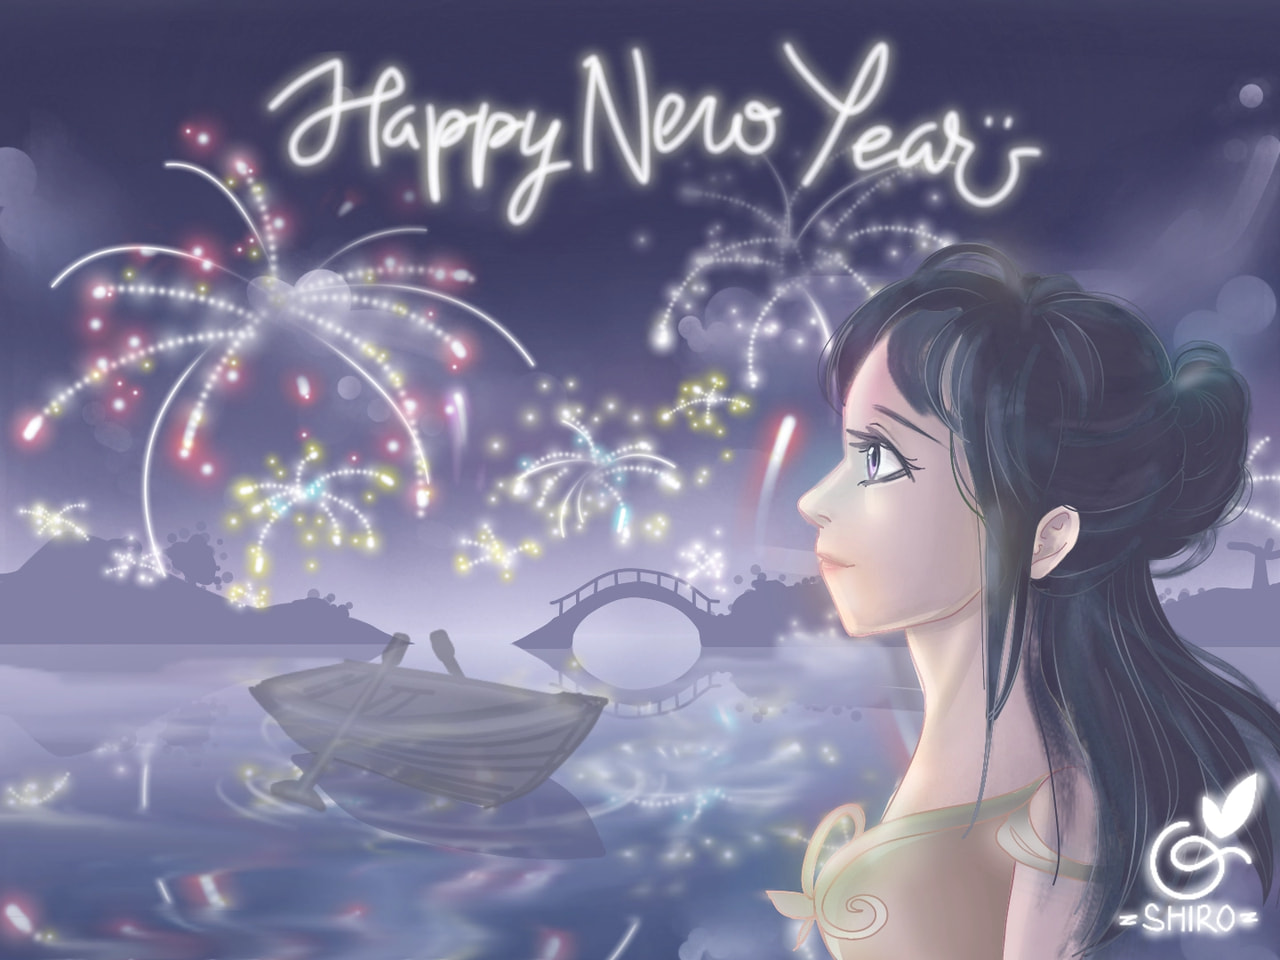 HAPPY NEW YEAR GUYS! my wish for 2019 are to improving my art :') and to be happy always #newyear #newyear2019 #fridaywithsketch #my2019wish #fireworks #lake #Reflection #reflections#featured#HappyNewYear #HNY XD thanks for the feature